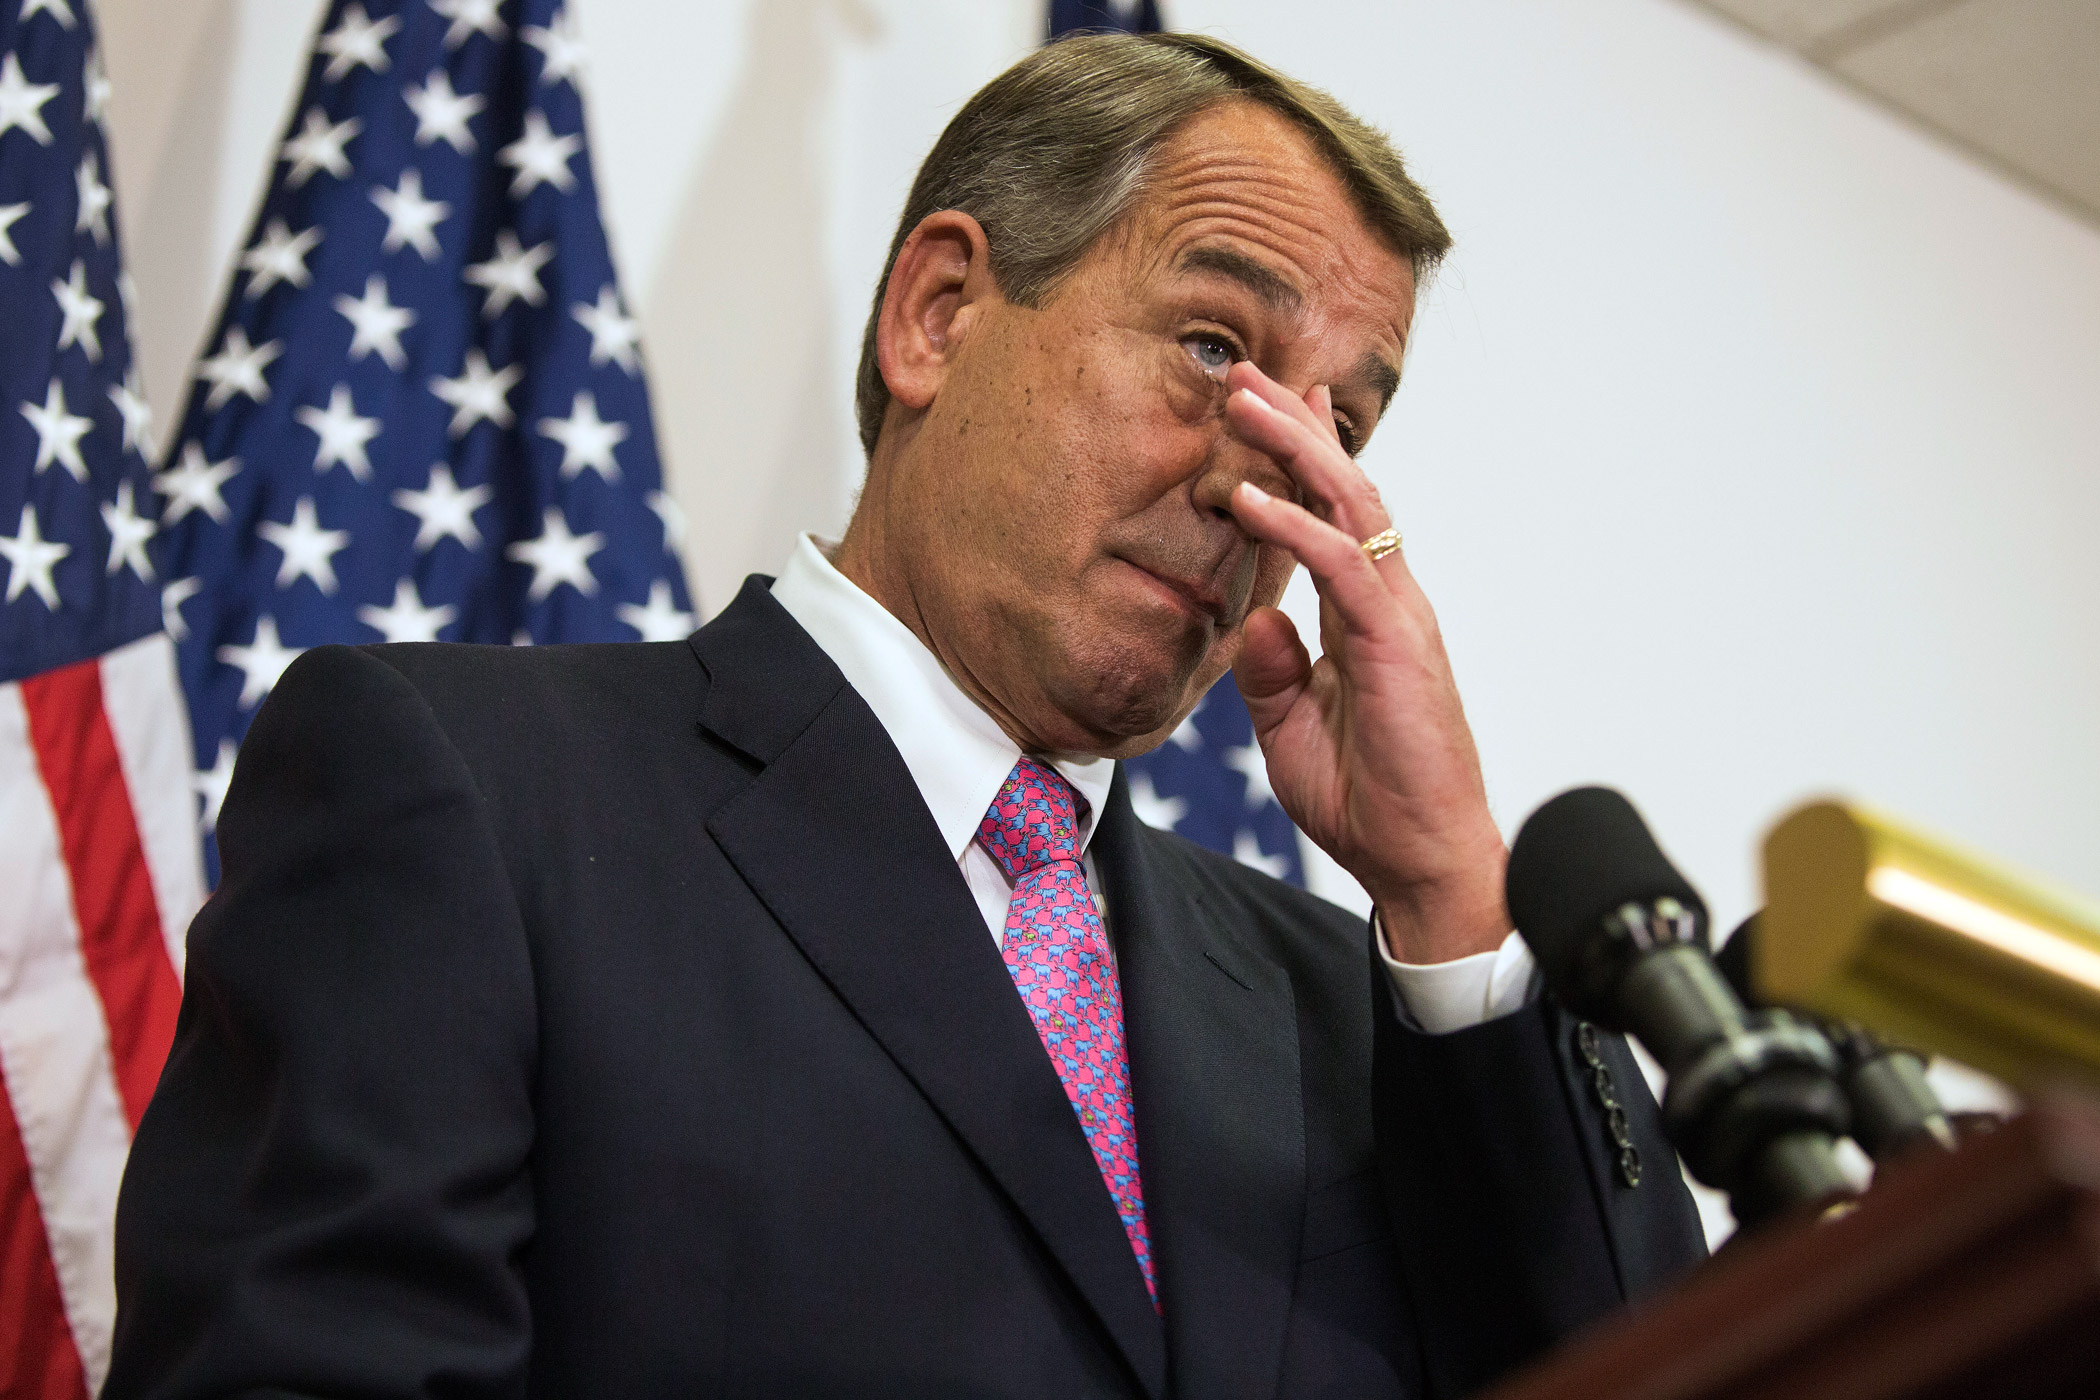 Boehner becomes emotional during his last weekly news conference as Speaker on Capitol Hill in Washington on Oct. 27, 2015.